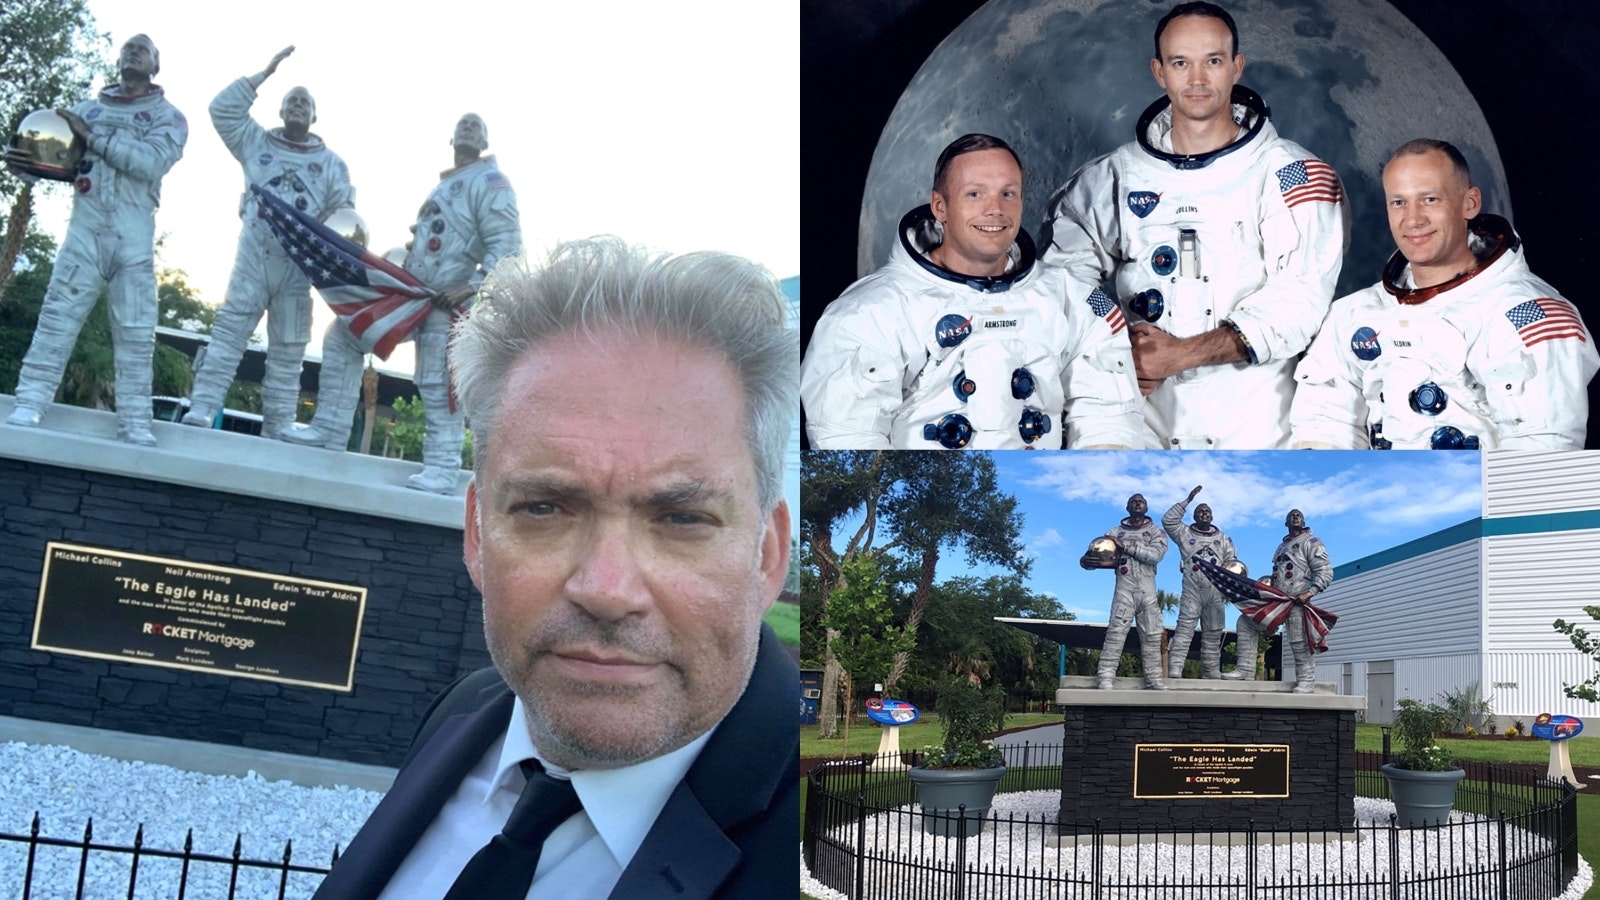 Steven Barber with the Apollo 11 monument at the Kennedy Space Center in Florida. It features the three Apollo 11 astronauts Neil Armstrong, Edwin “Buzz” Aldrin and Michael Collins.